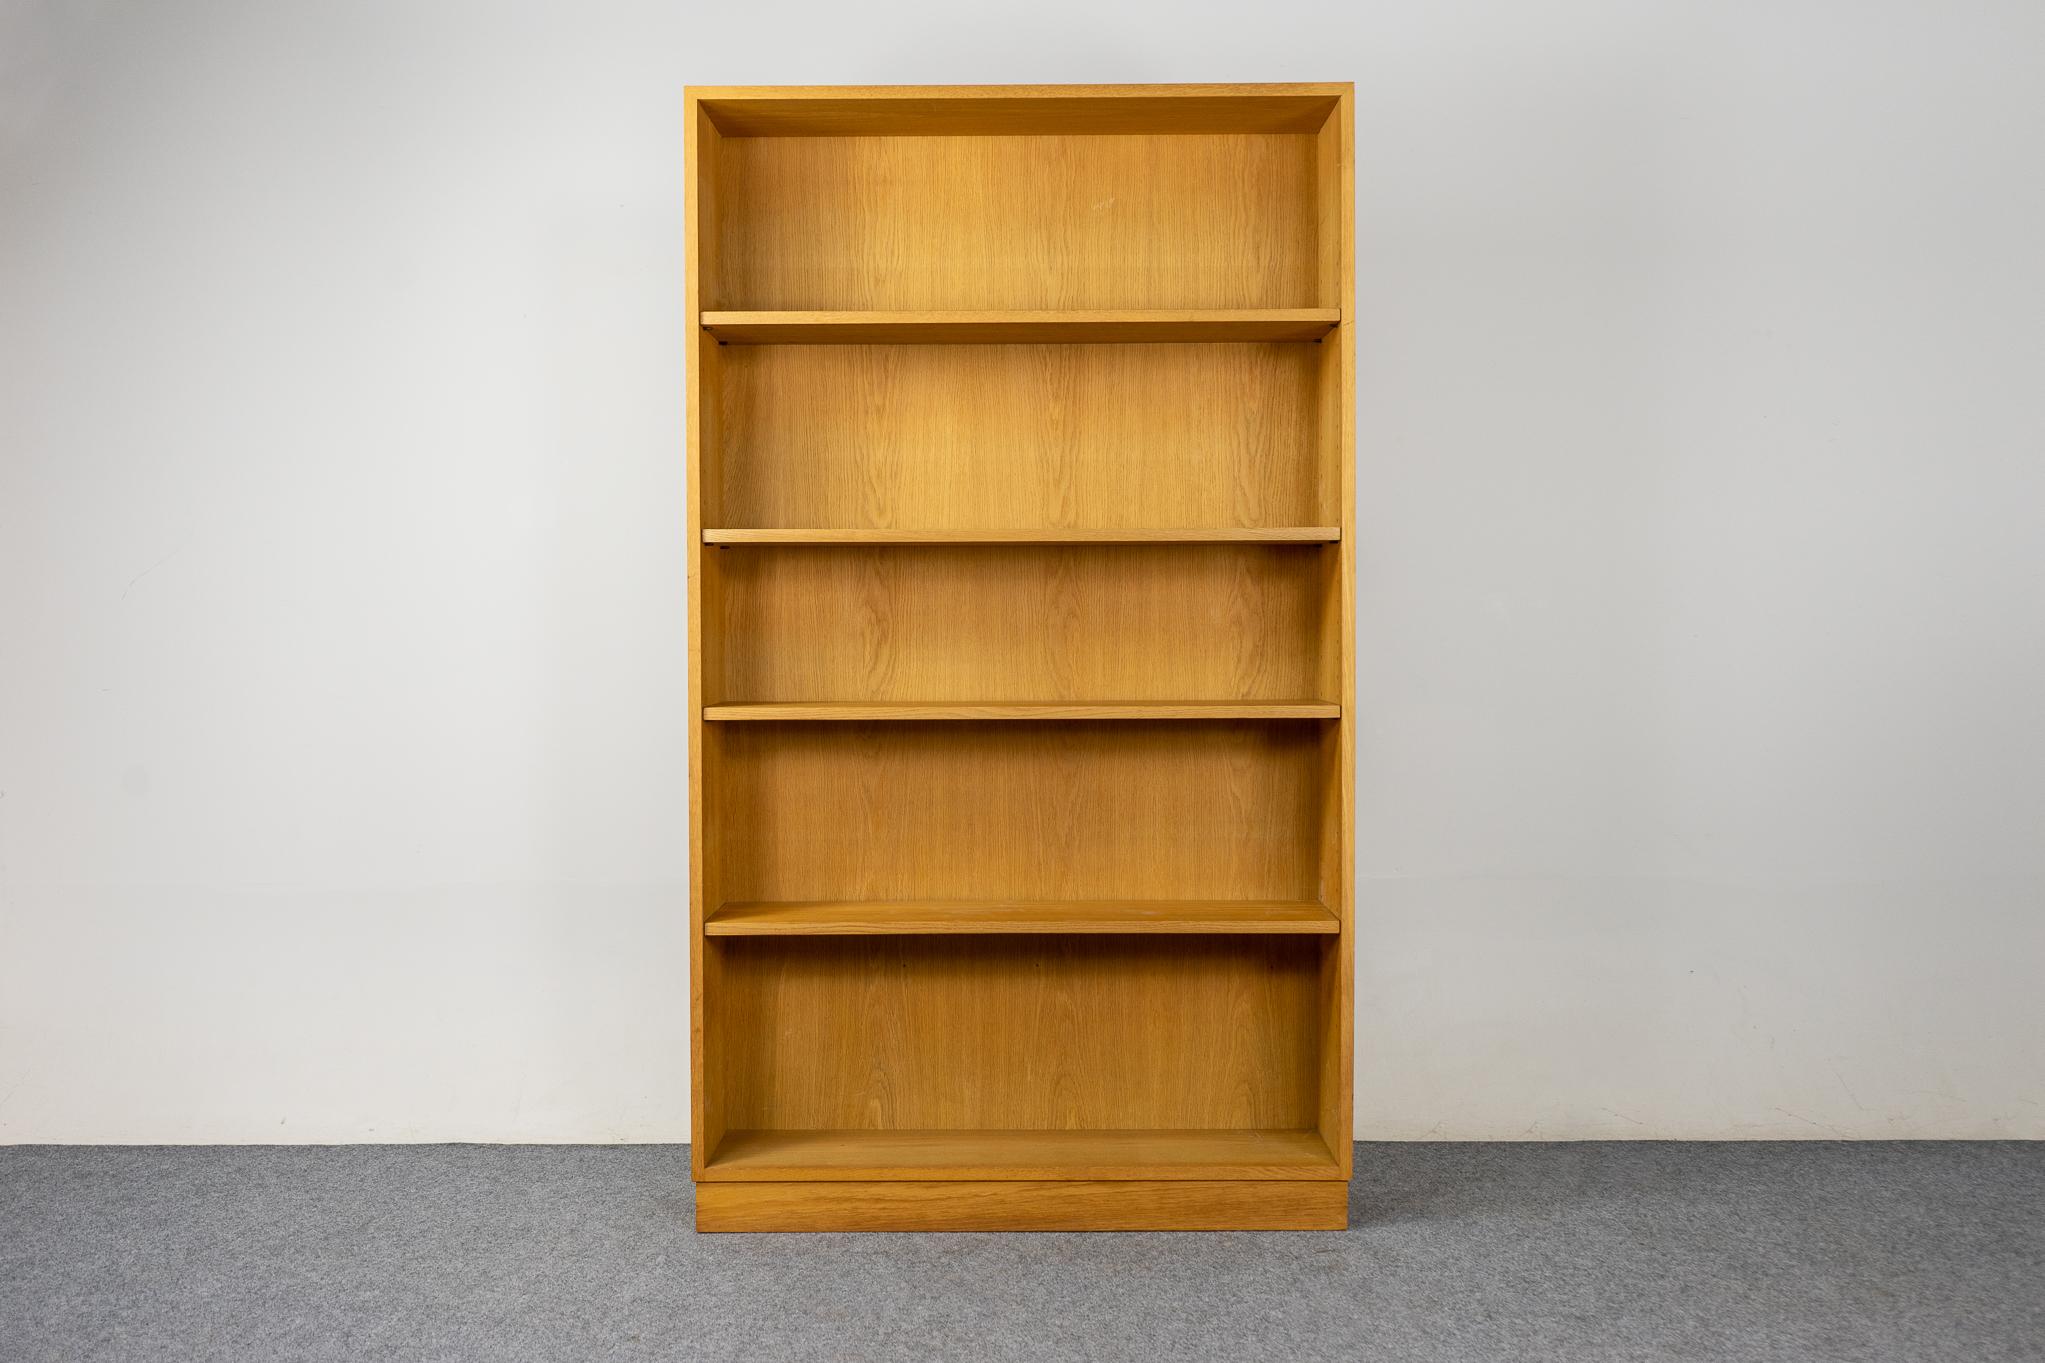 Danish Modern oak bookcase, circa 1960's. This open bookcase offers removable and adjustable shelving, removable legs and the compact design makes it the perfect condo sized storage solution. This tall open bookcase offers removable and adjustable